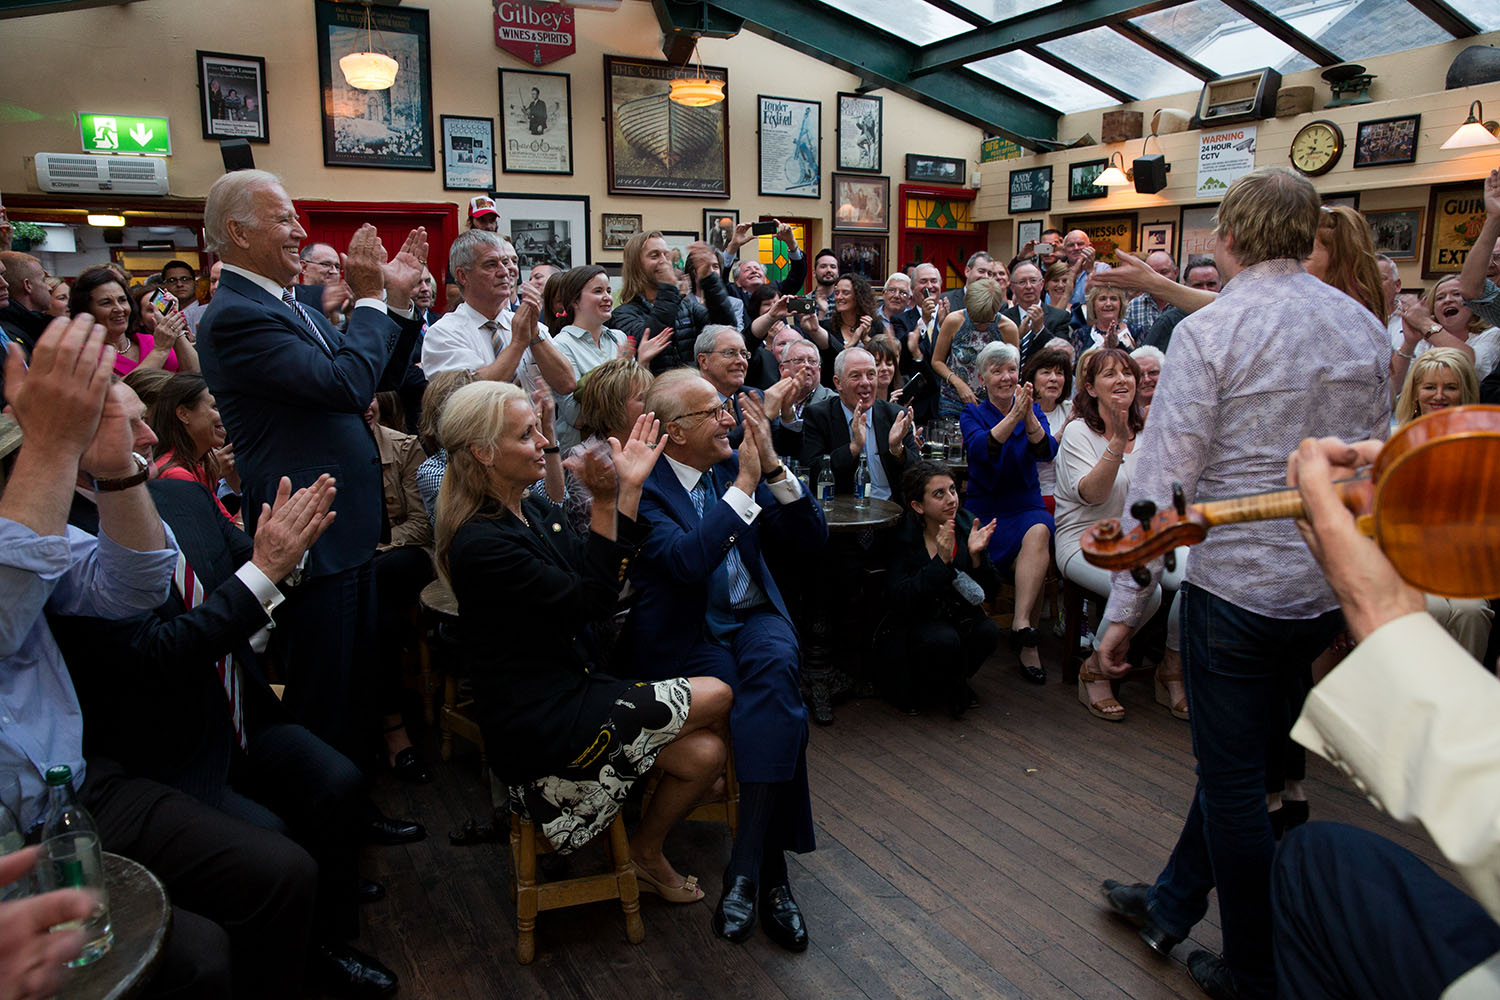 Vice President Joe Biden applauds for Irish dancers and the band the Chieftains, at Matt Malloy's pub in Westport, Ireland, June 22, 2016. (Official White House Photo by David Lienemann)